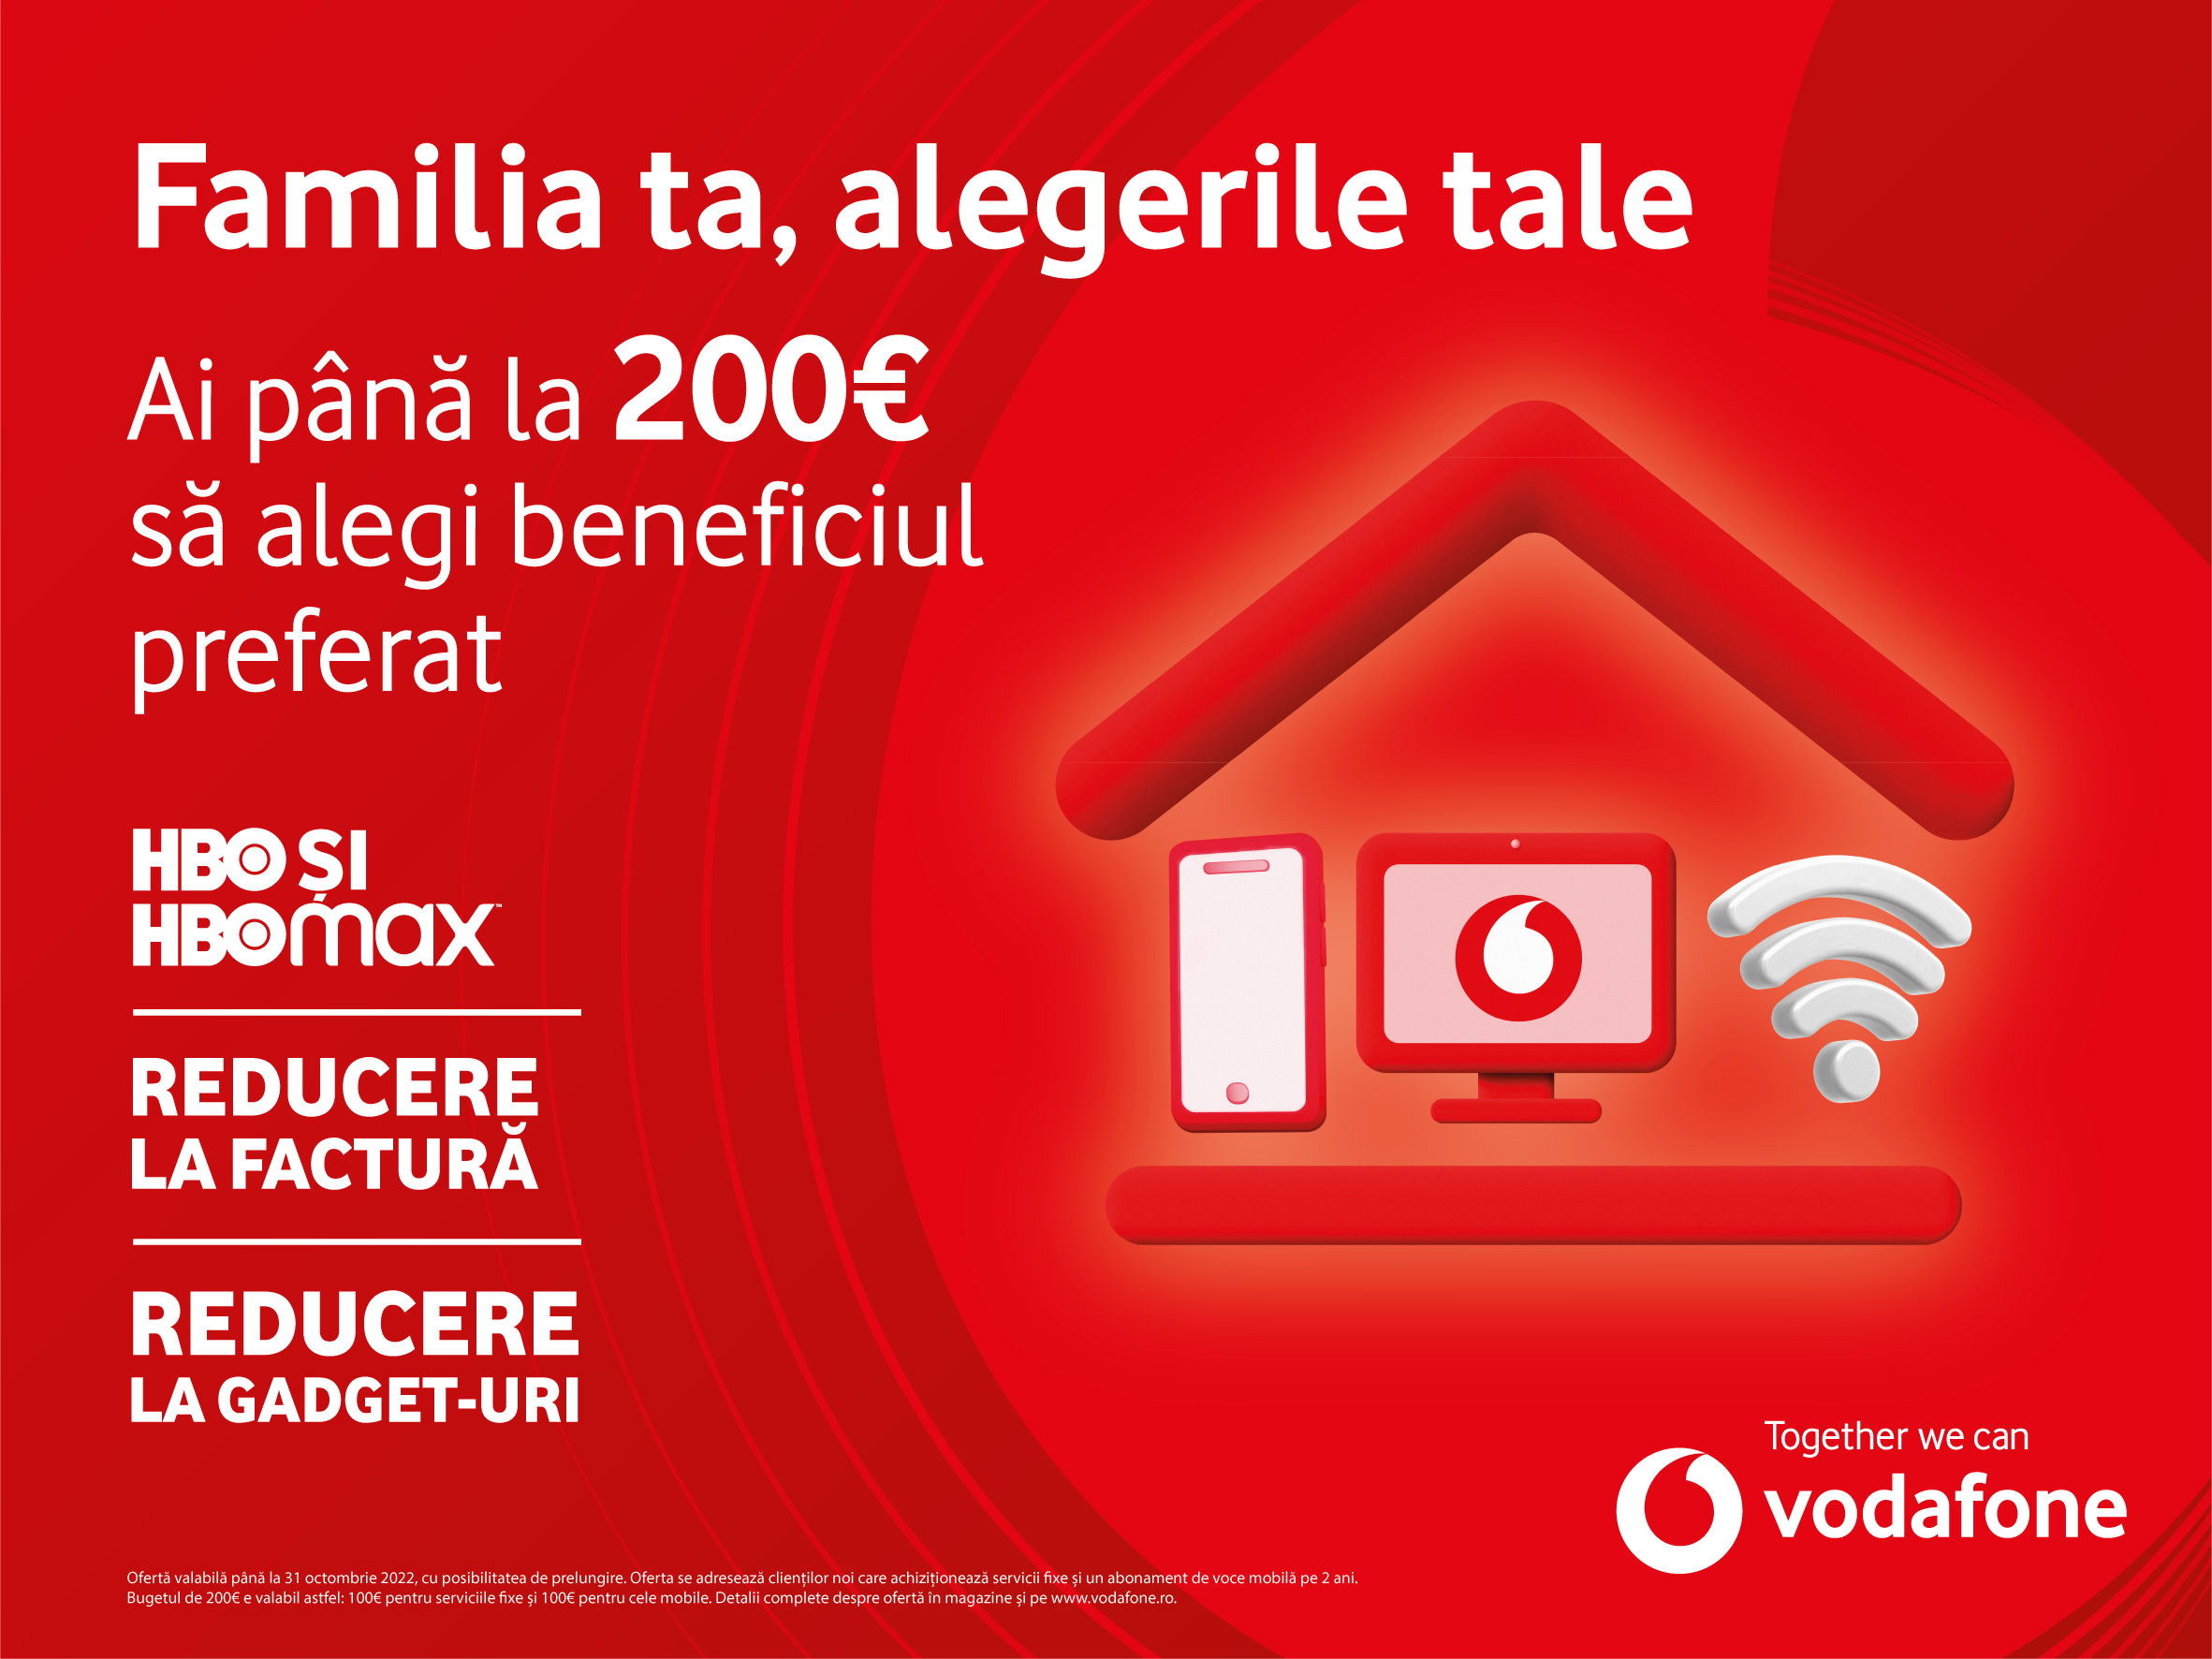 Vodafone comes with offers for every single family and a budget of 200 EUR for benefits at choice